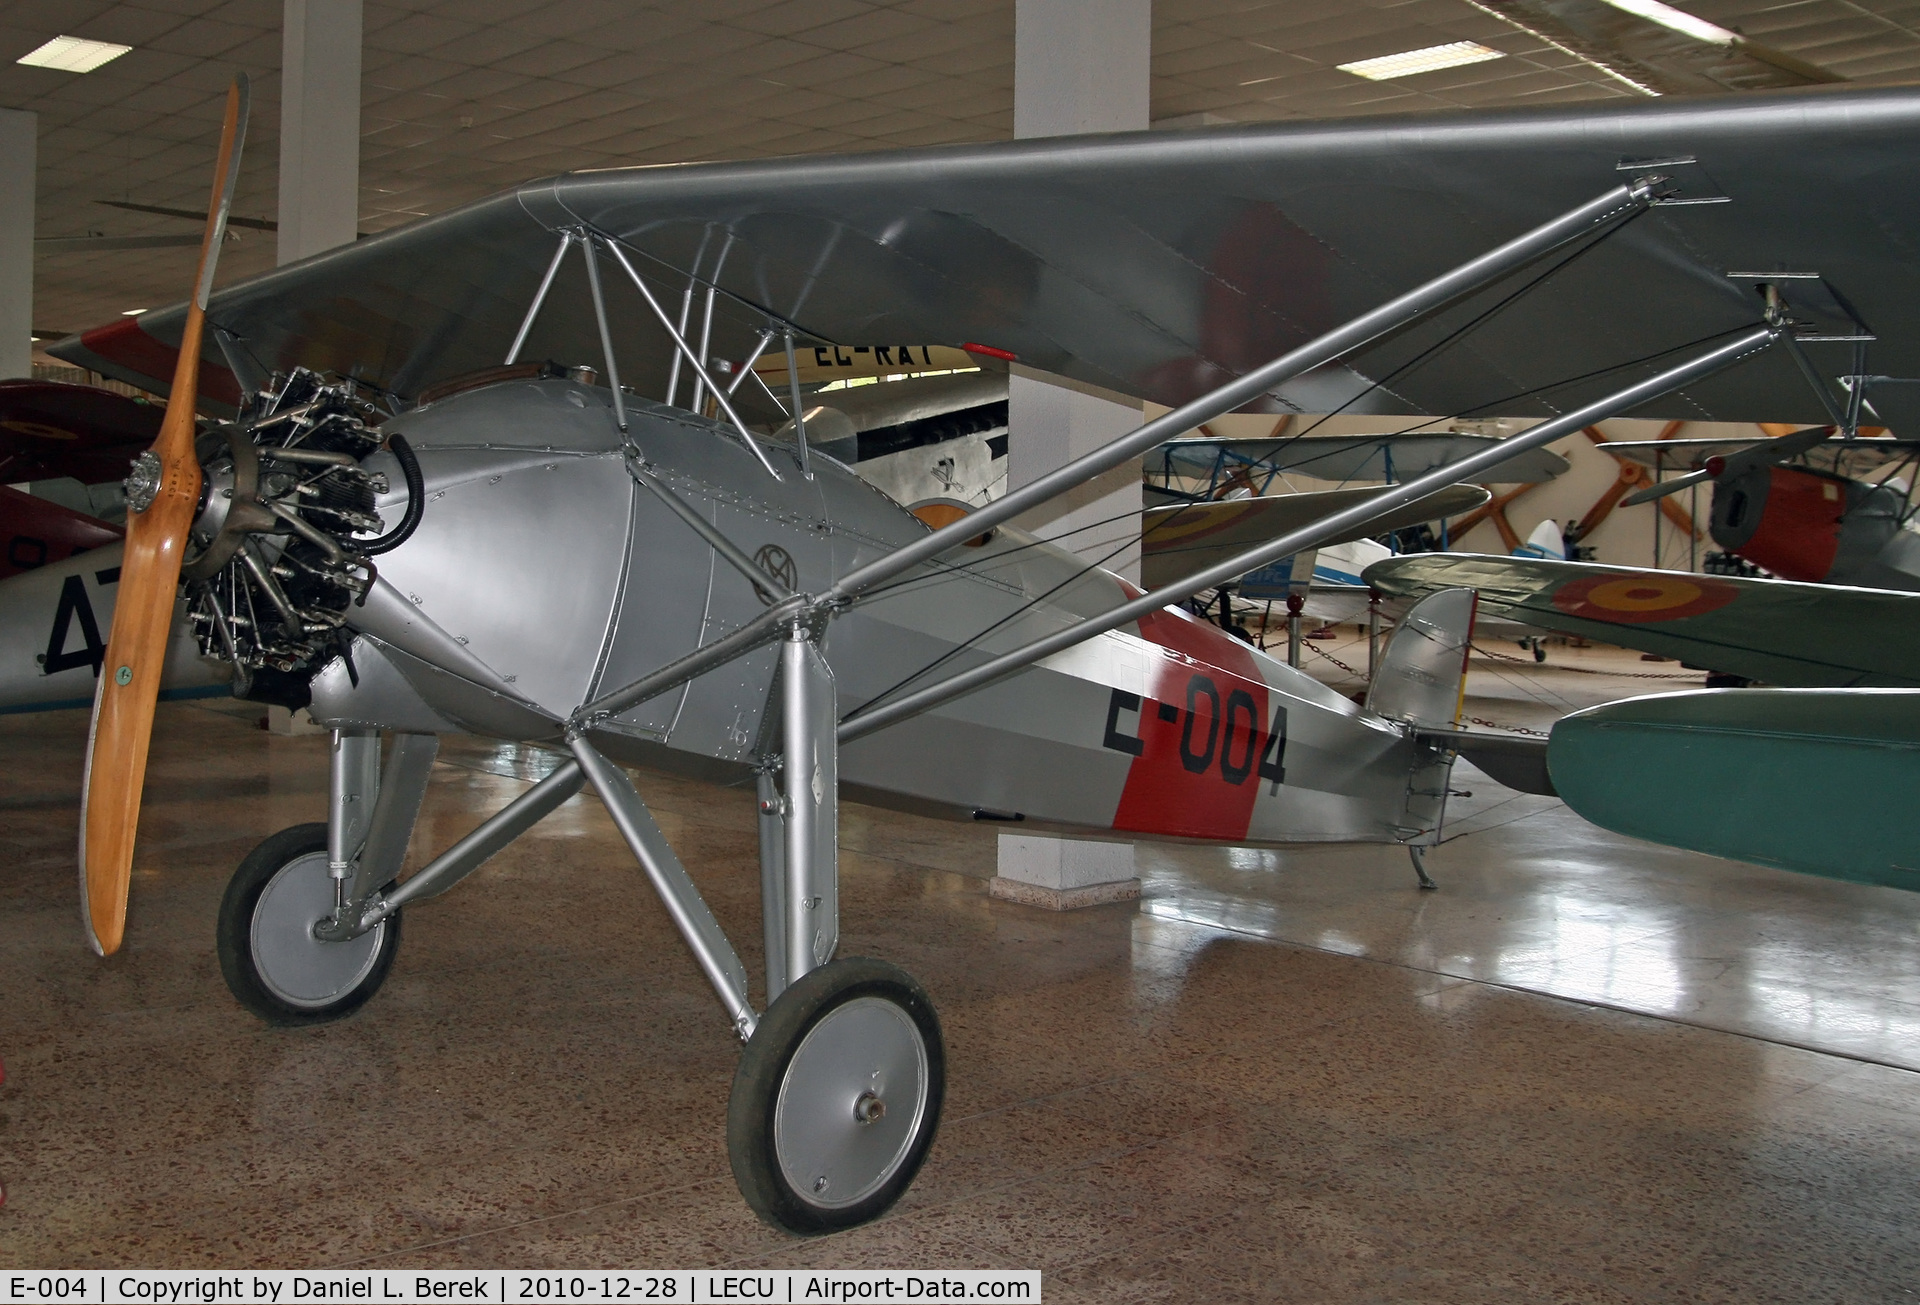 E-004, Morane-Saulnier MS-181 C/N Not found E-004, Preserved at the Museo del Aire, Madrid, Spain.  Flew for the Republican Army.